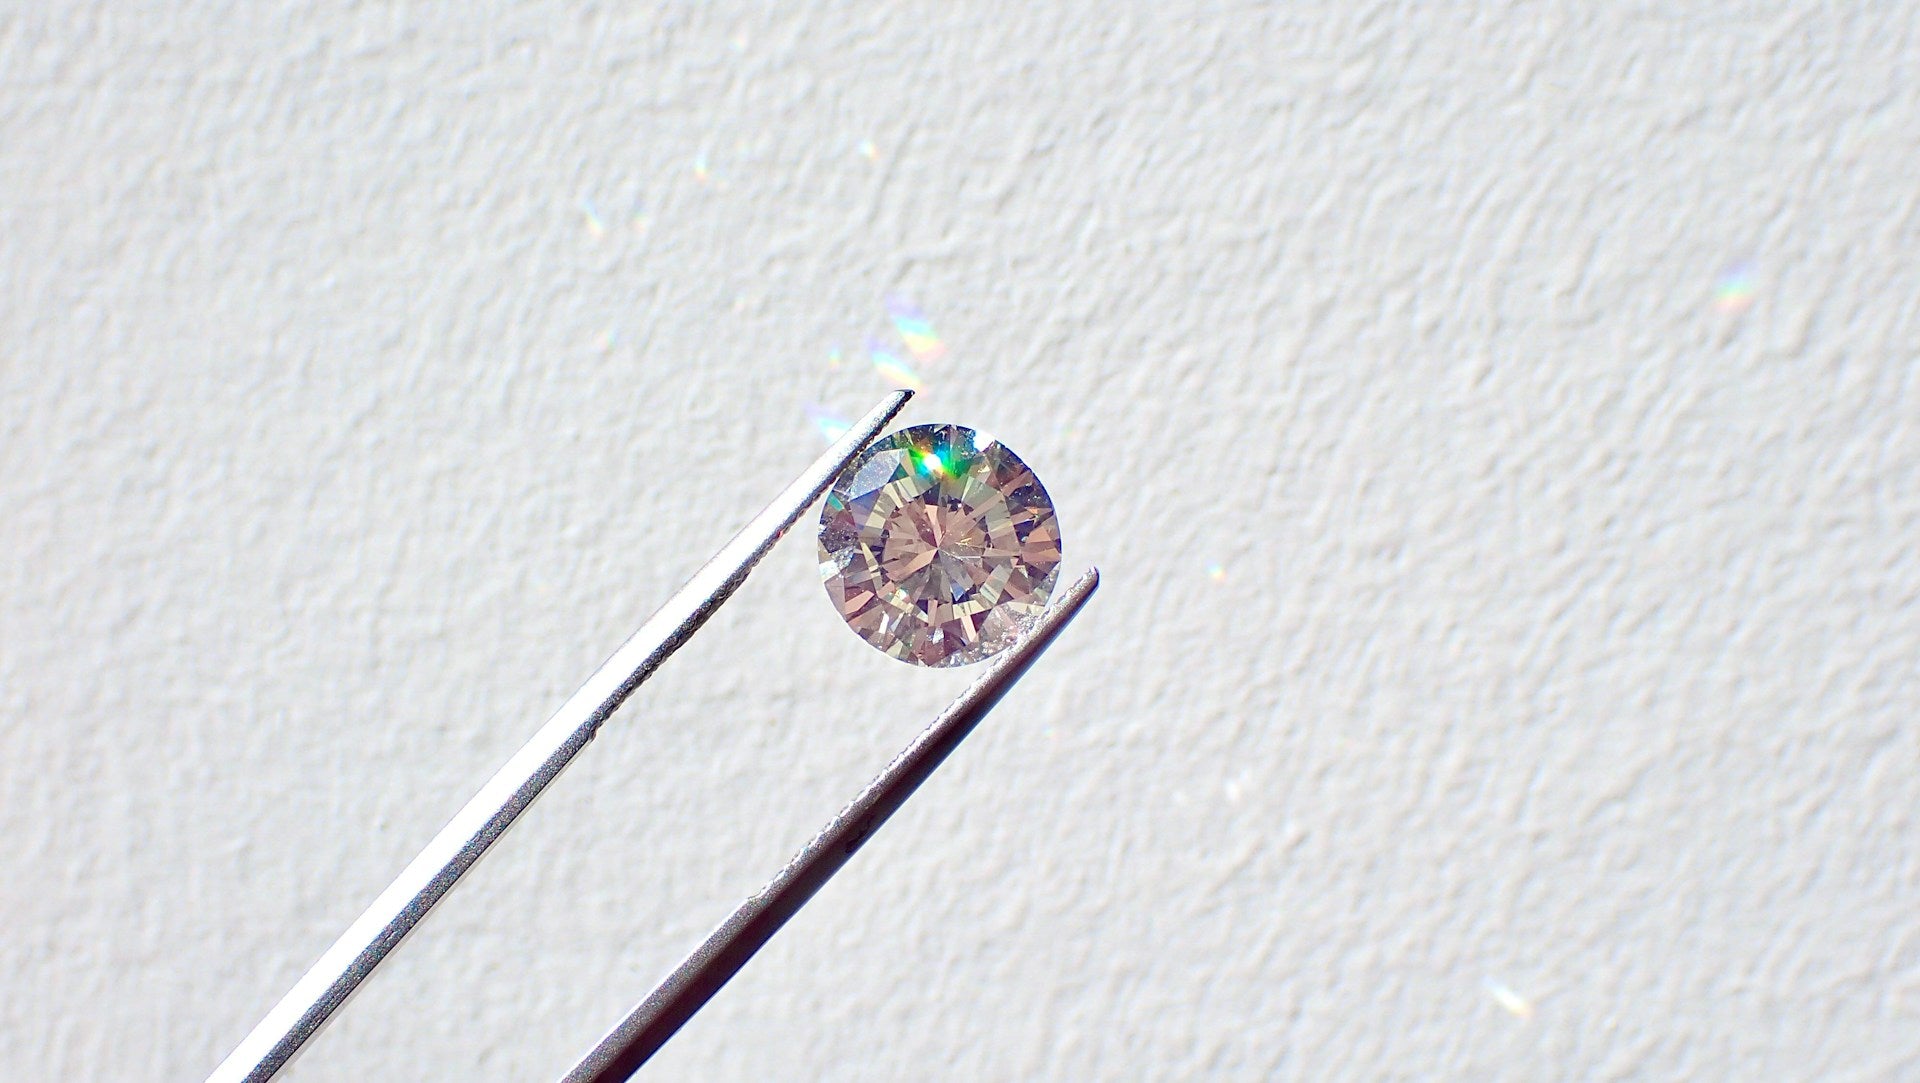 A pair of tweezers holding a real diamond up to the light